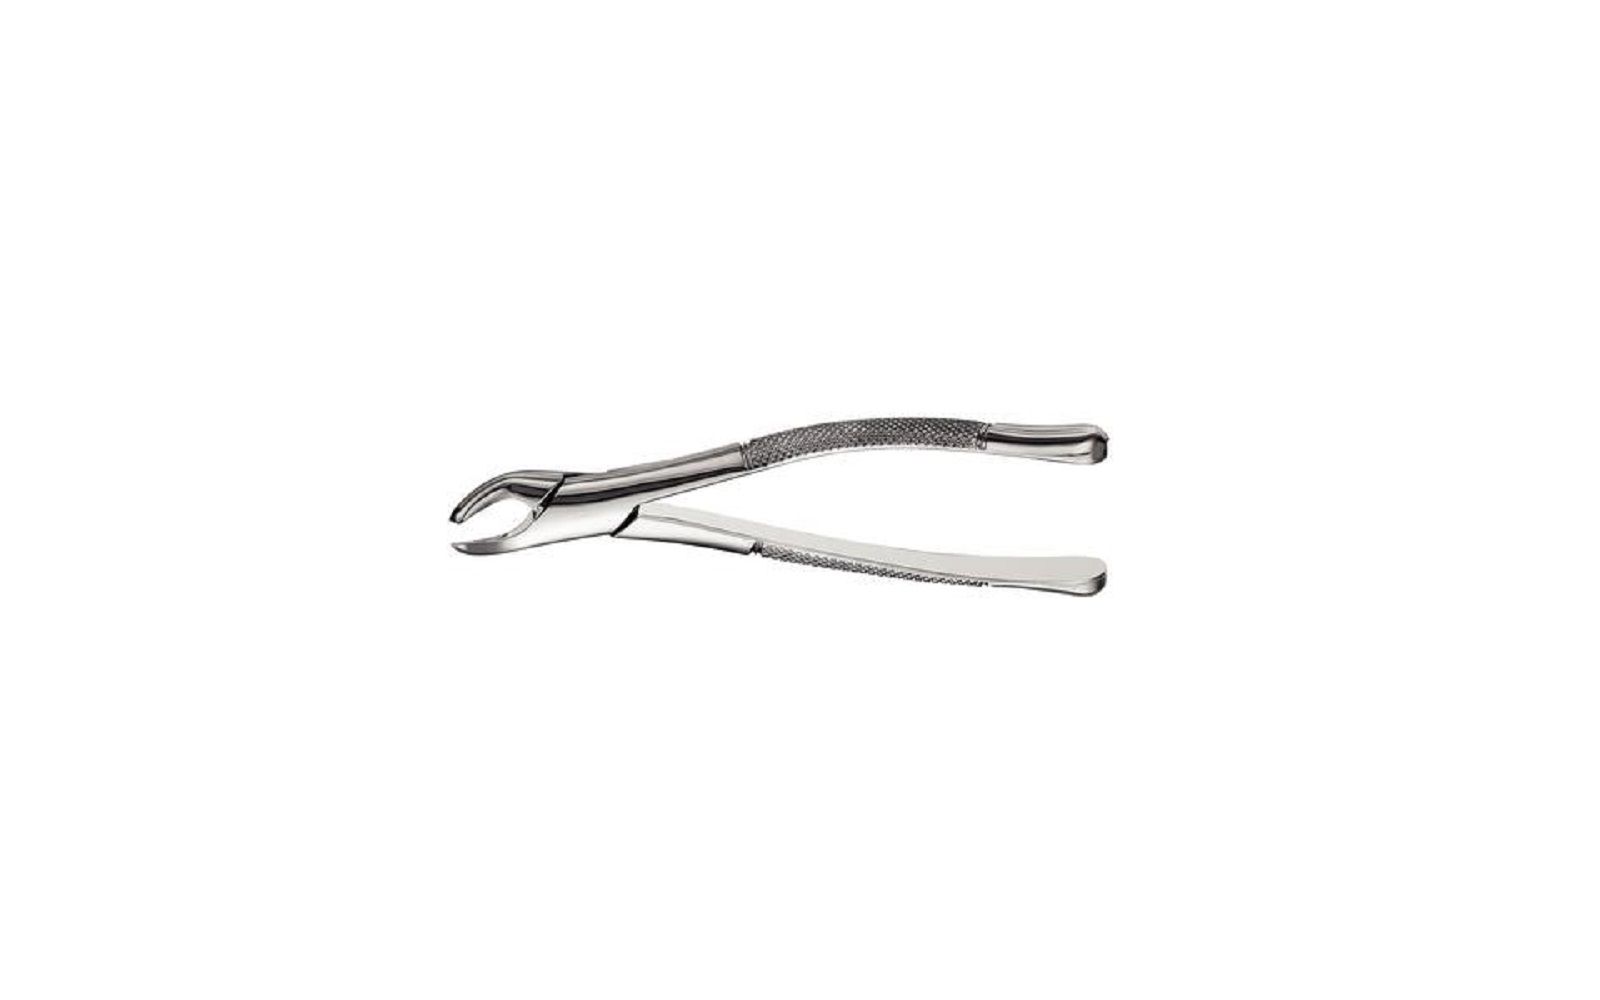 Extraction forceps, 151 cryer